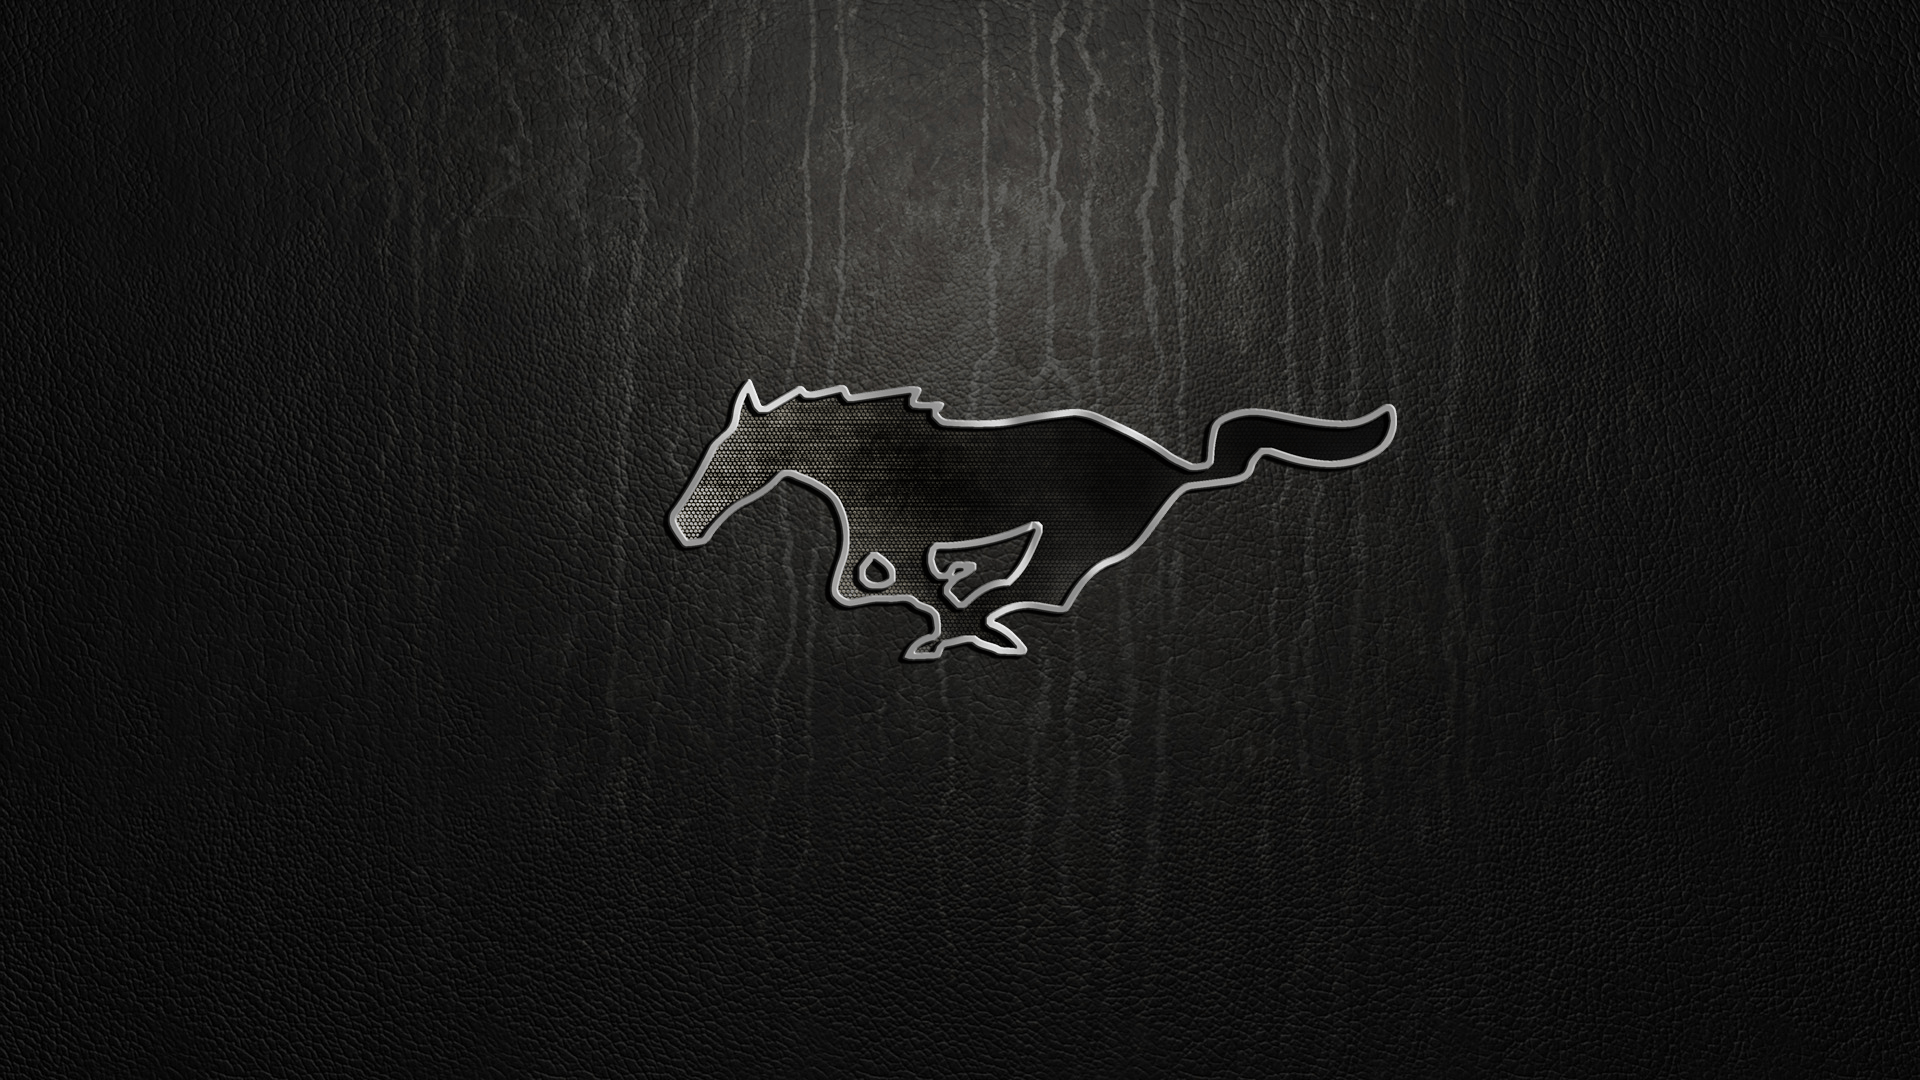 Black Ford Mustang Logo - Mustang Logo Wallpaper For Iphone #gtc | Cars | Mustang, Ford, Ford ...